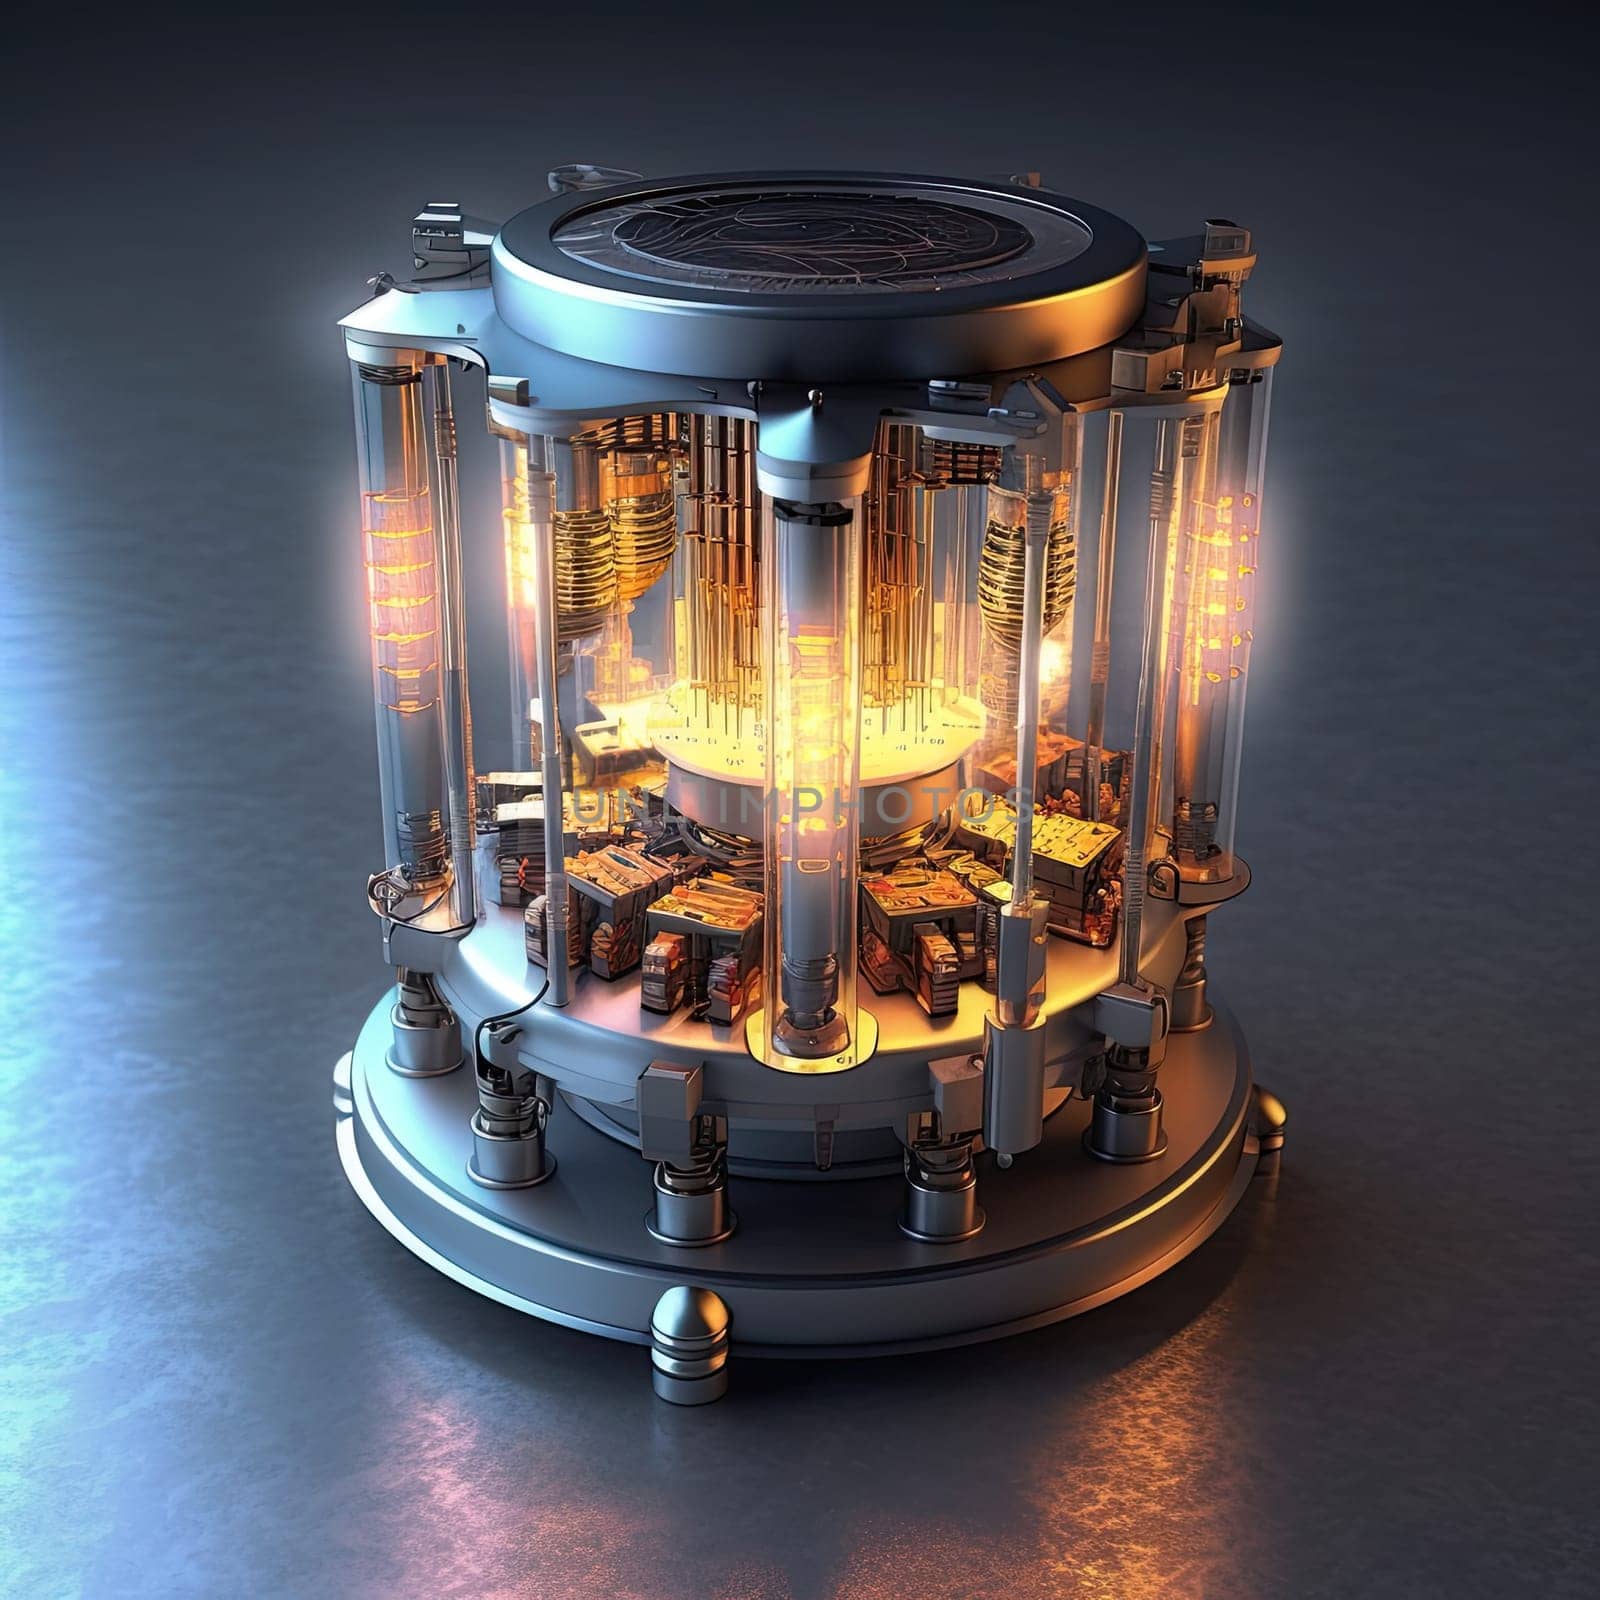 The micro nuclear reactor of the future. The concept of energy sources